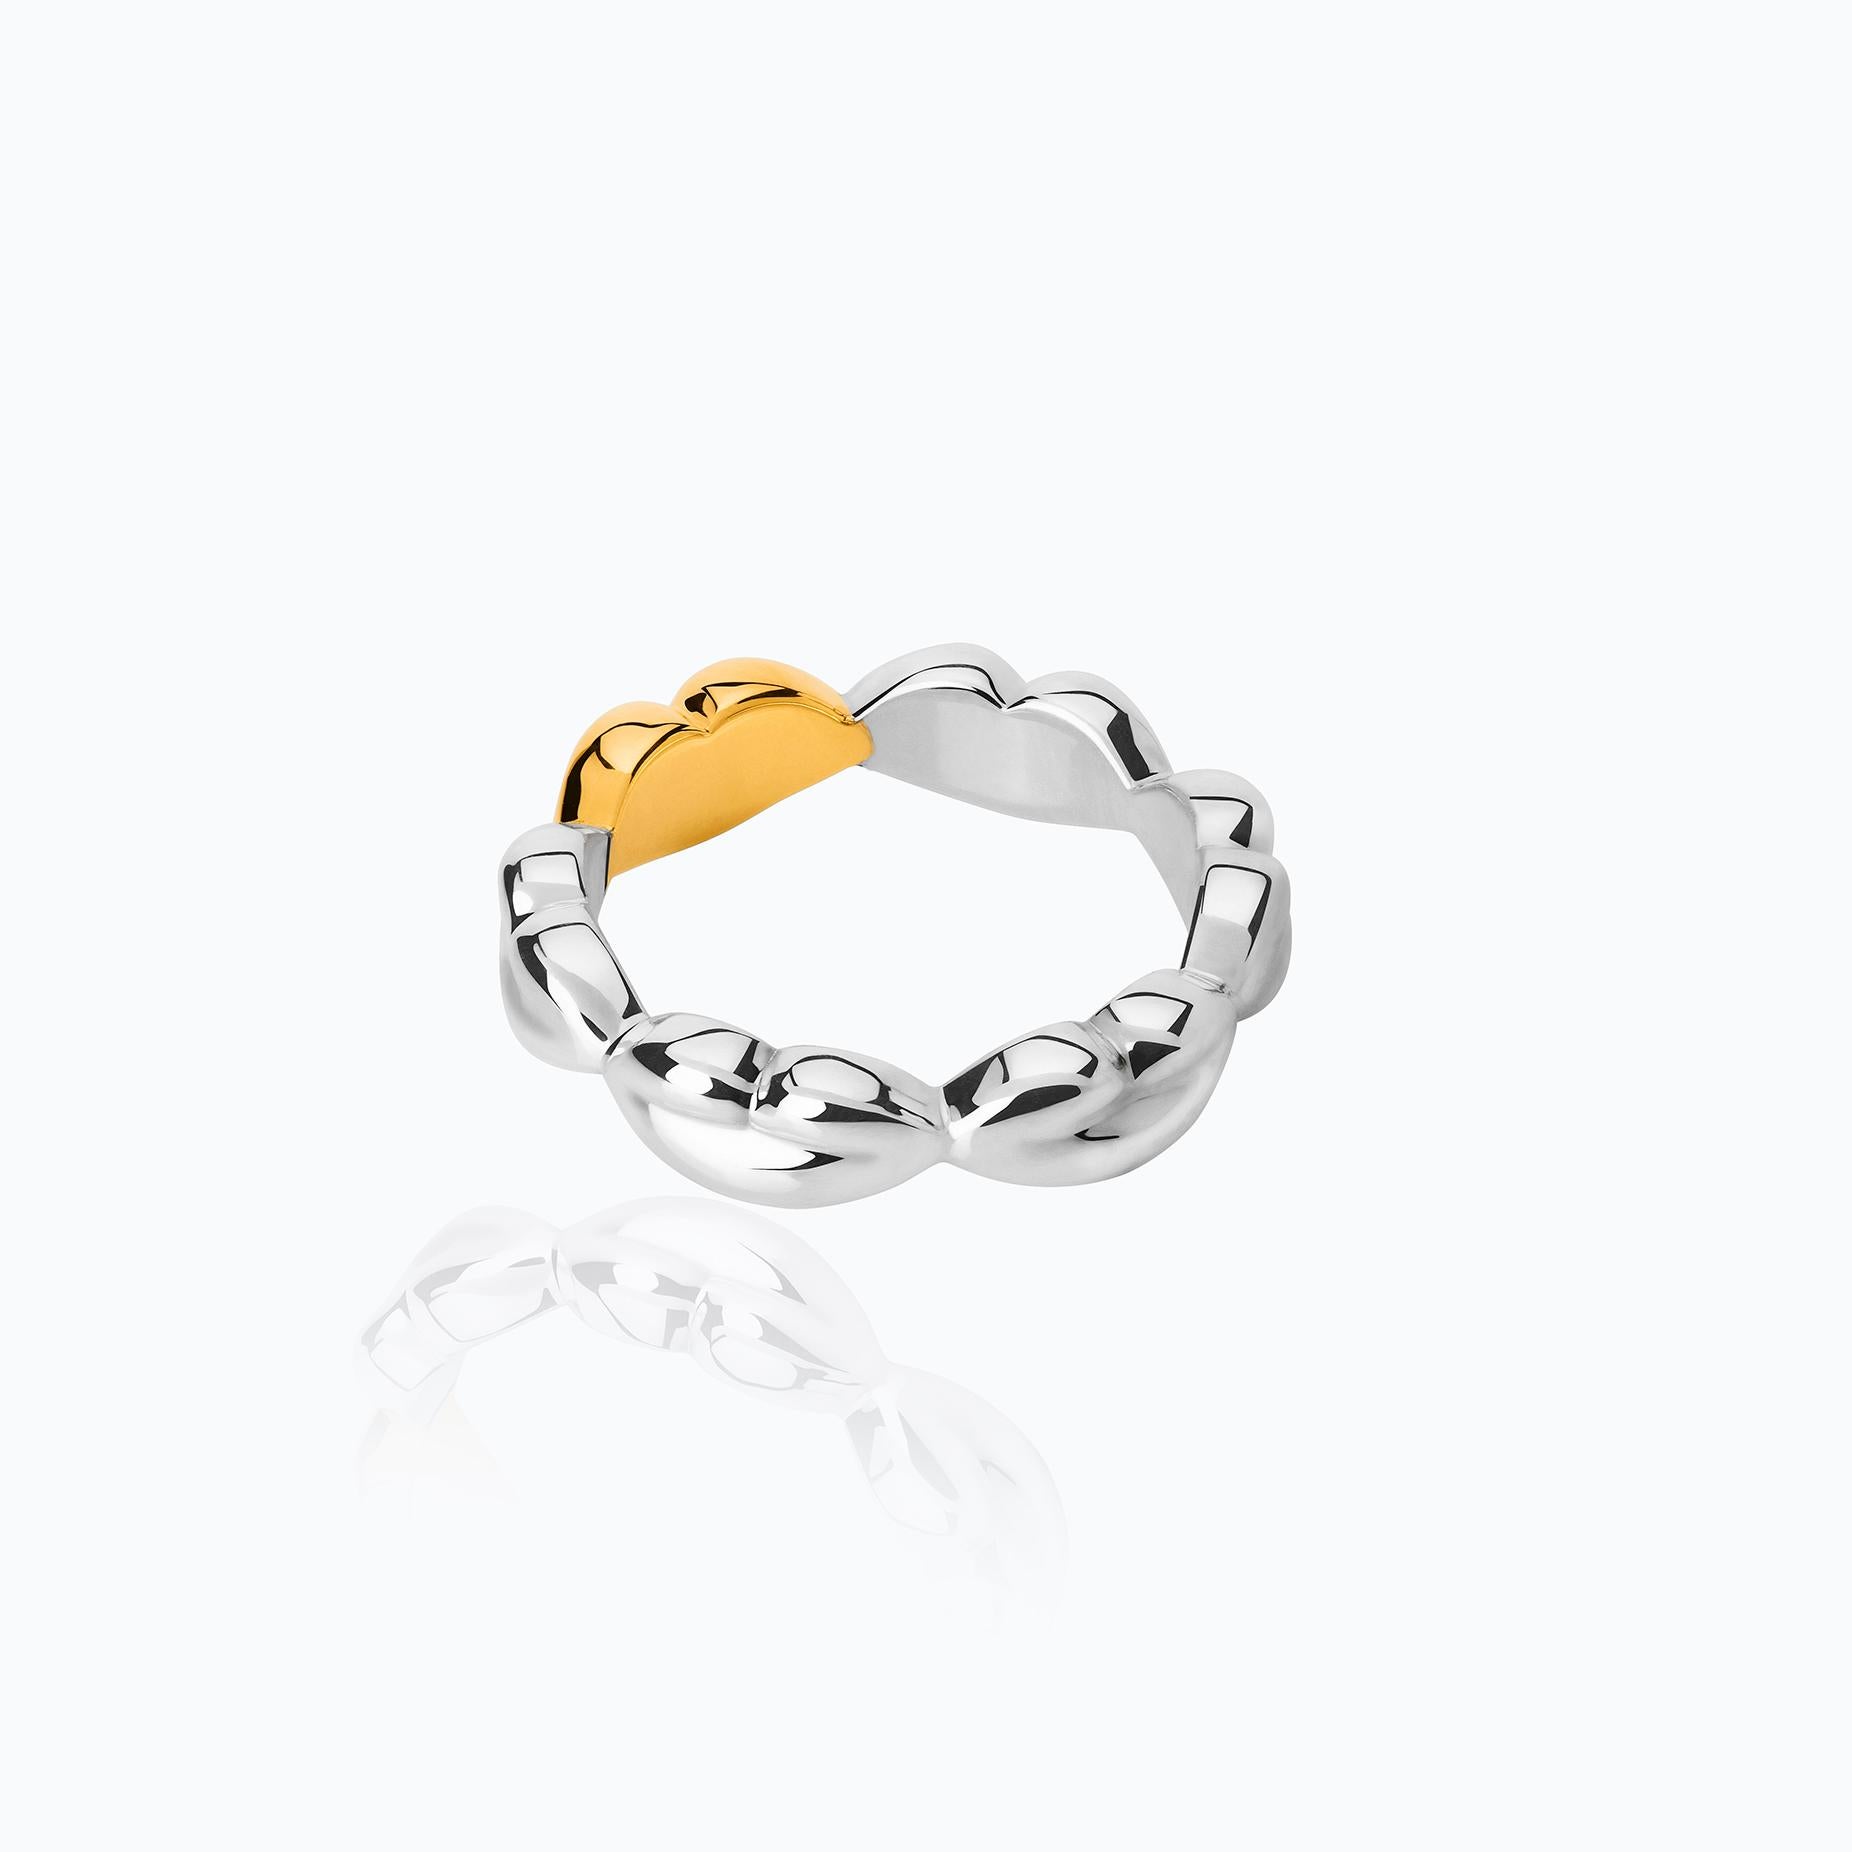 Sterling Silver With 23 Karat Yellow Gold Vermeil Bésame Texture Ring - Size 60 In New Condition For Sale In Mexico City, MX